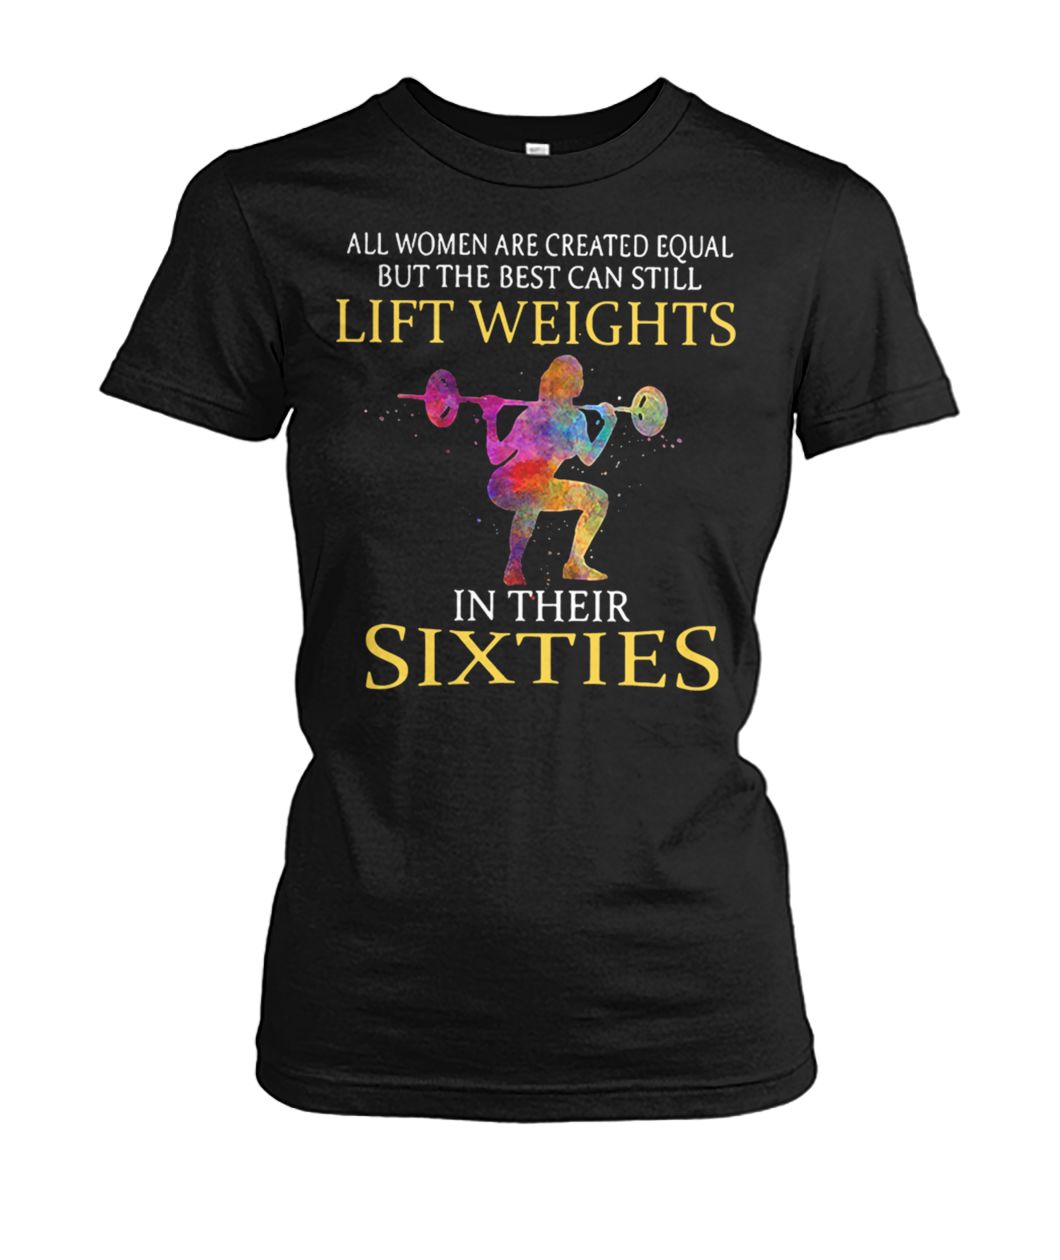 All women are created equal but the best can still lift weights in their sixties women's crew tee